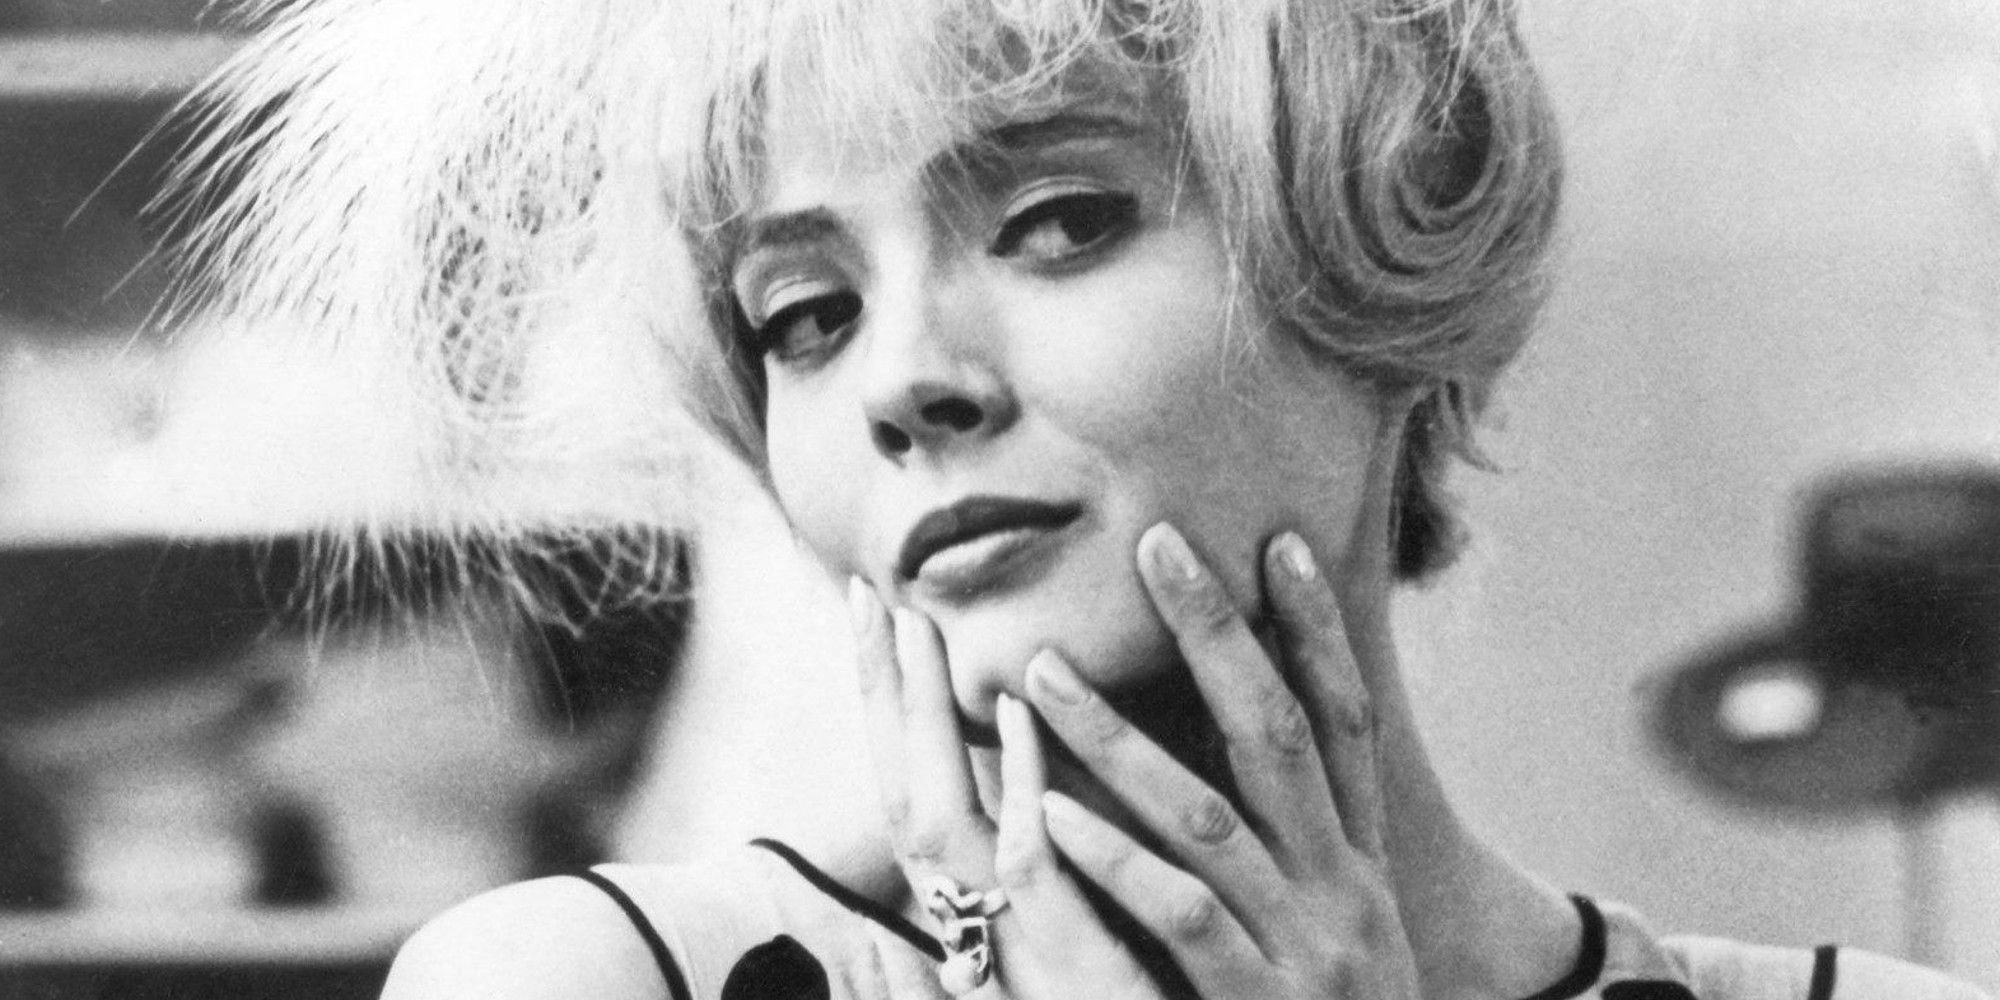 Corinne Marchand in 'Cléo from 5 to 7' (1962)